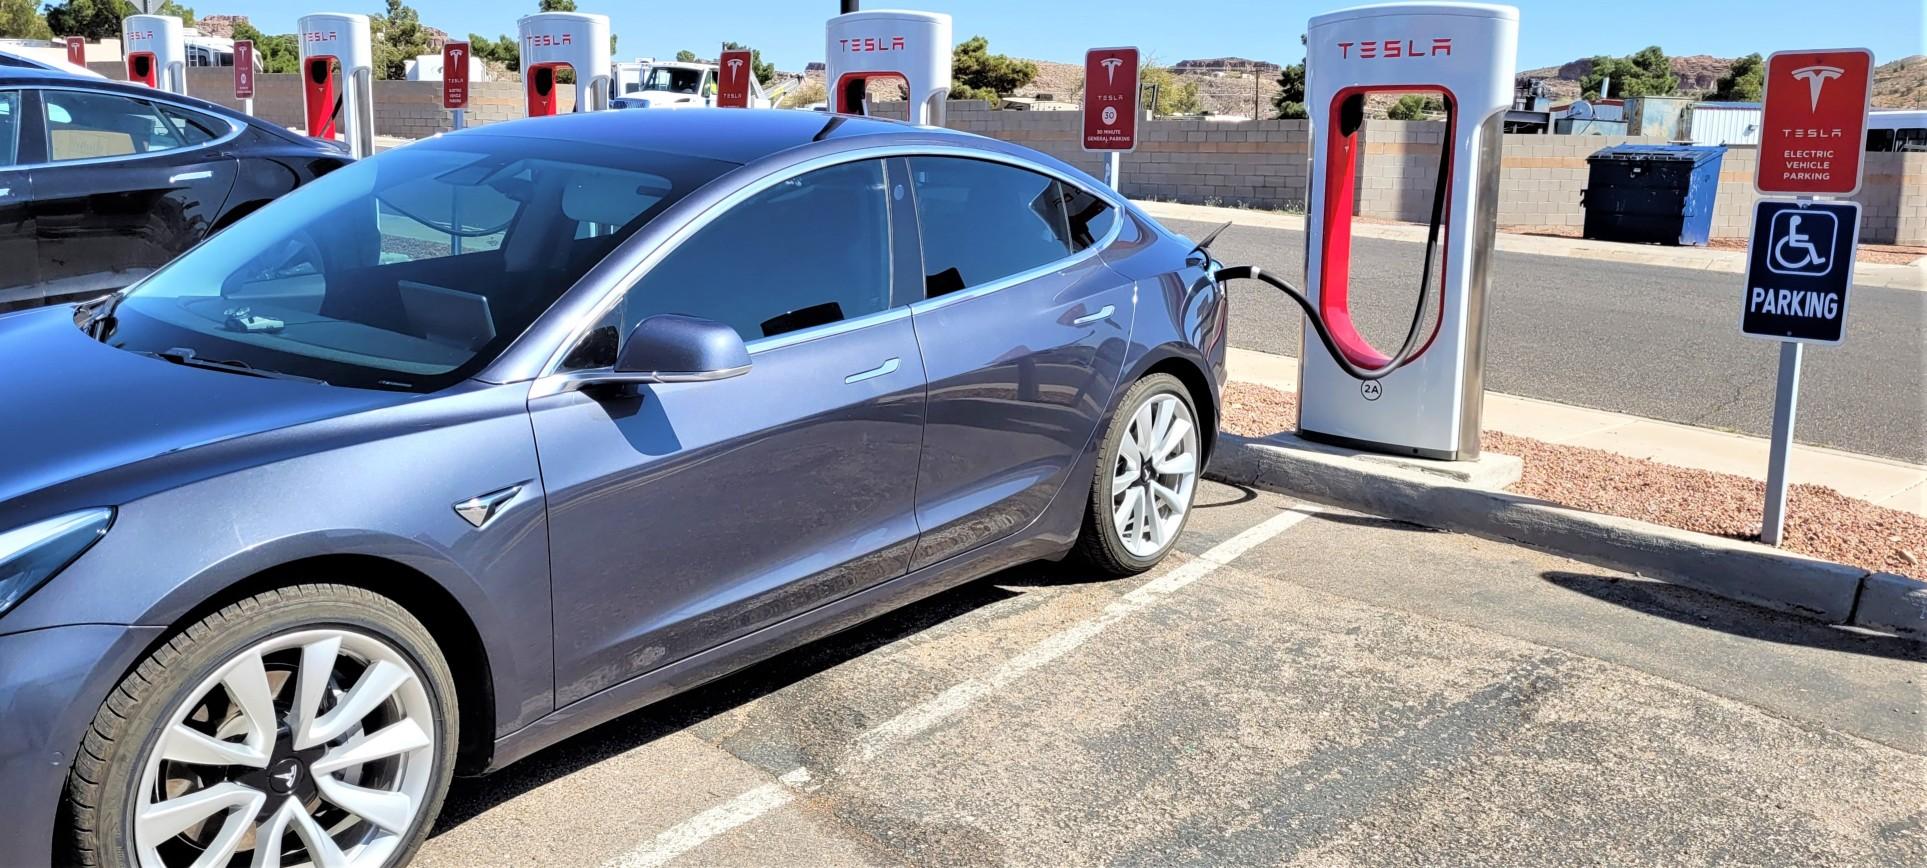 Tesla plans to include more amenities at its charging stations.